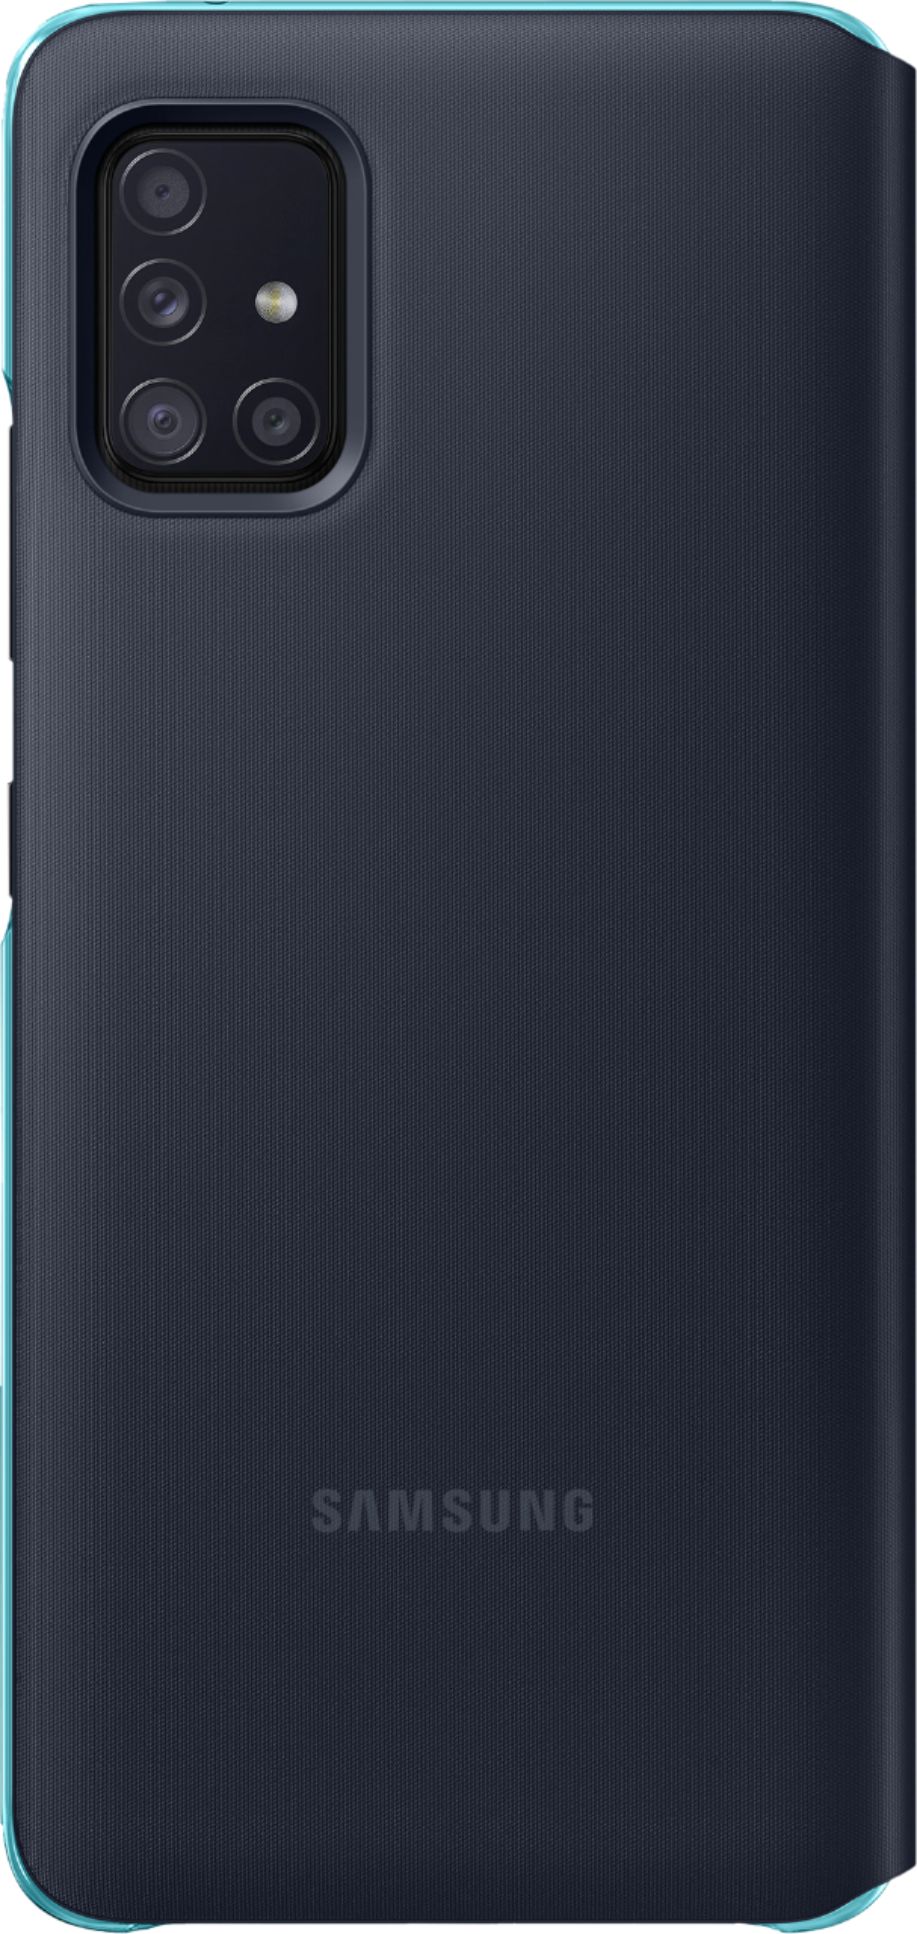 Samsung - S-View Flip Cover for Galaxy A51 5G - Black